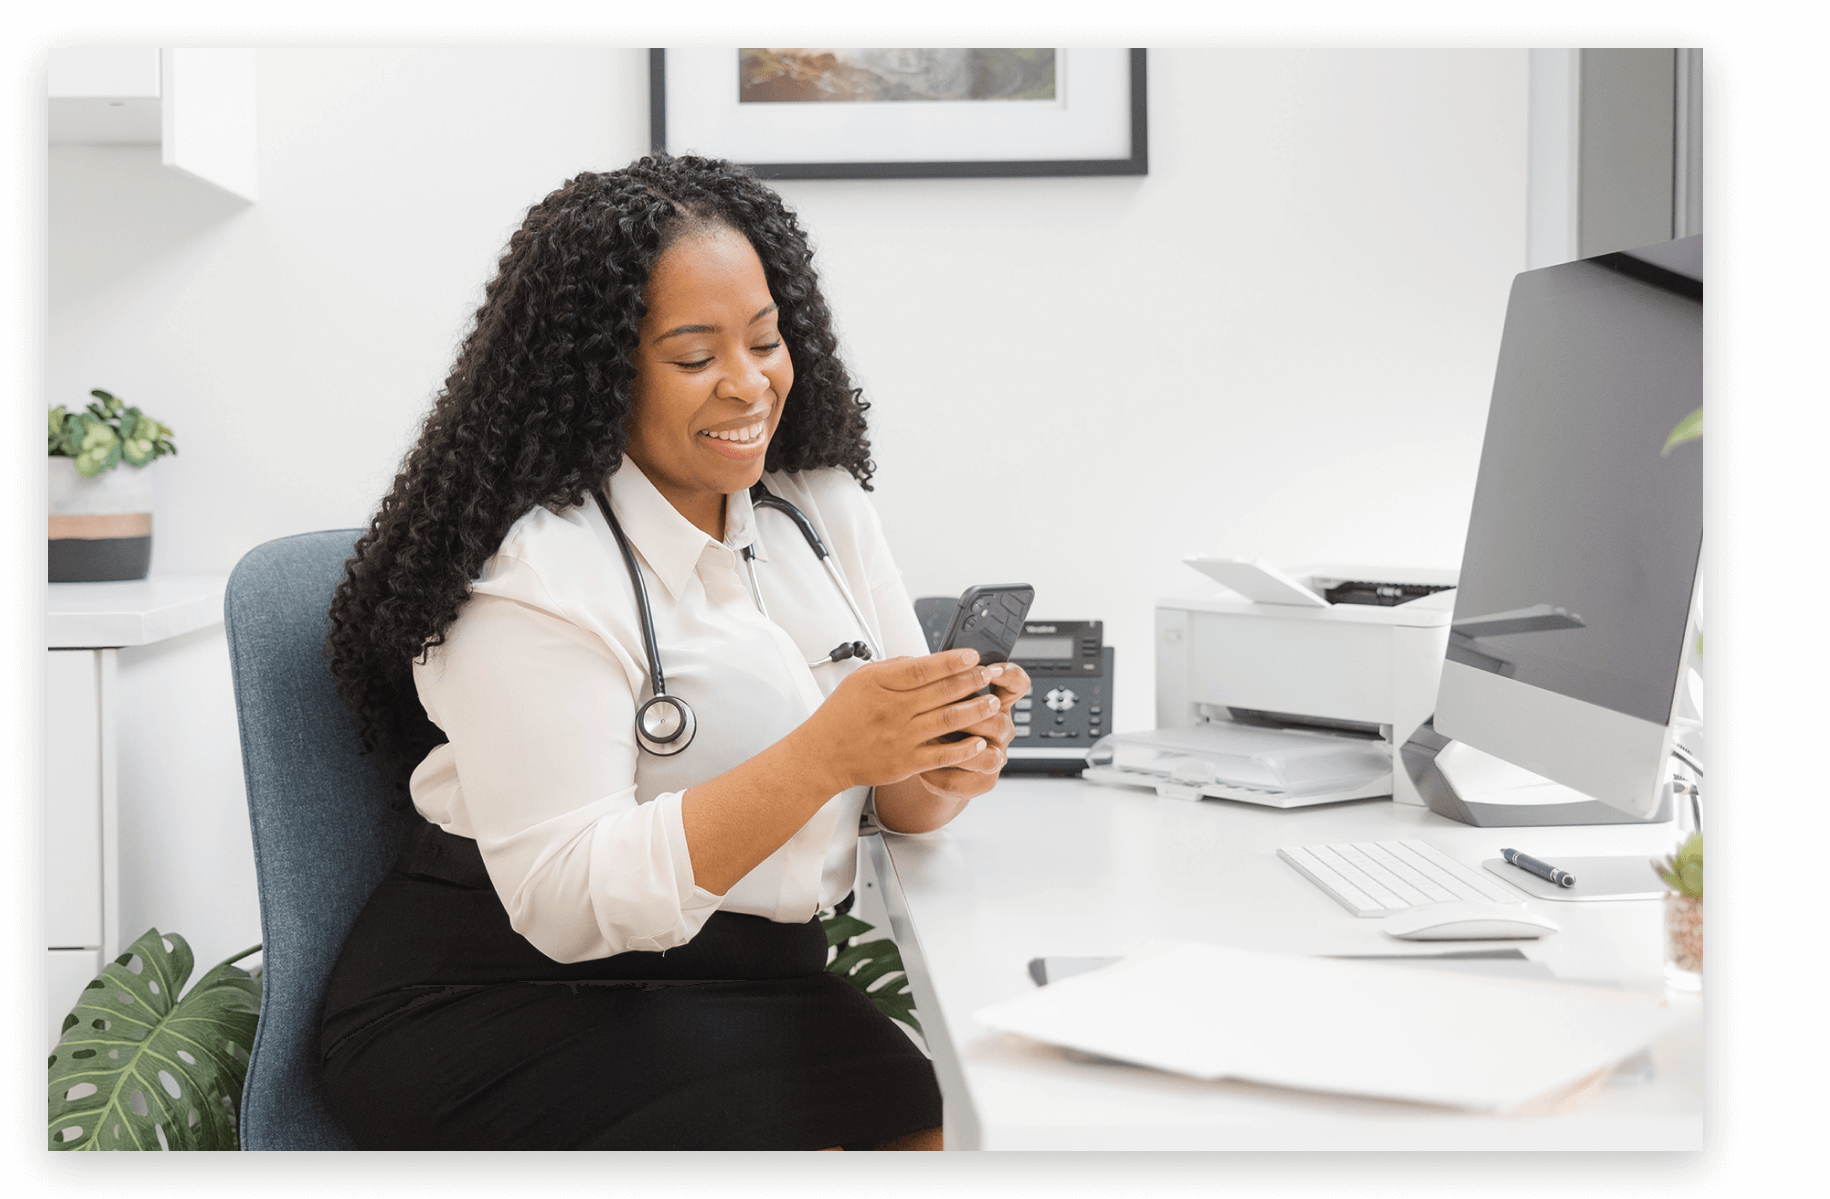 A doctor in her office checks her mobile phone.